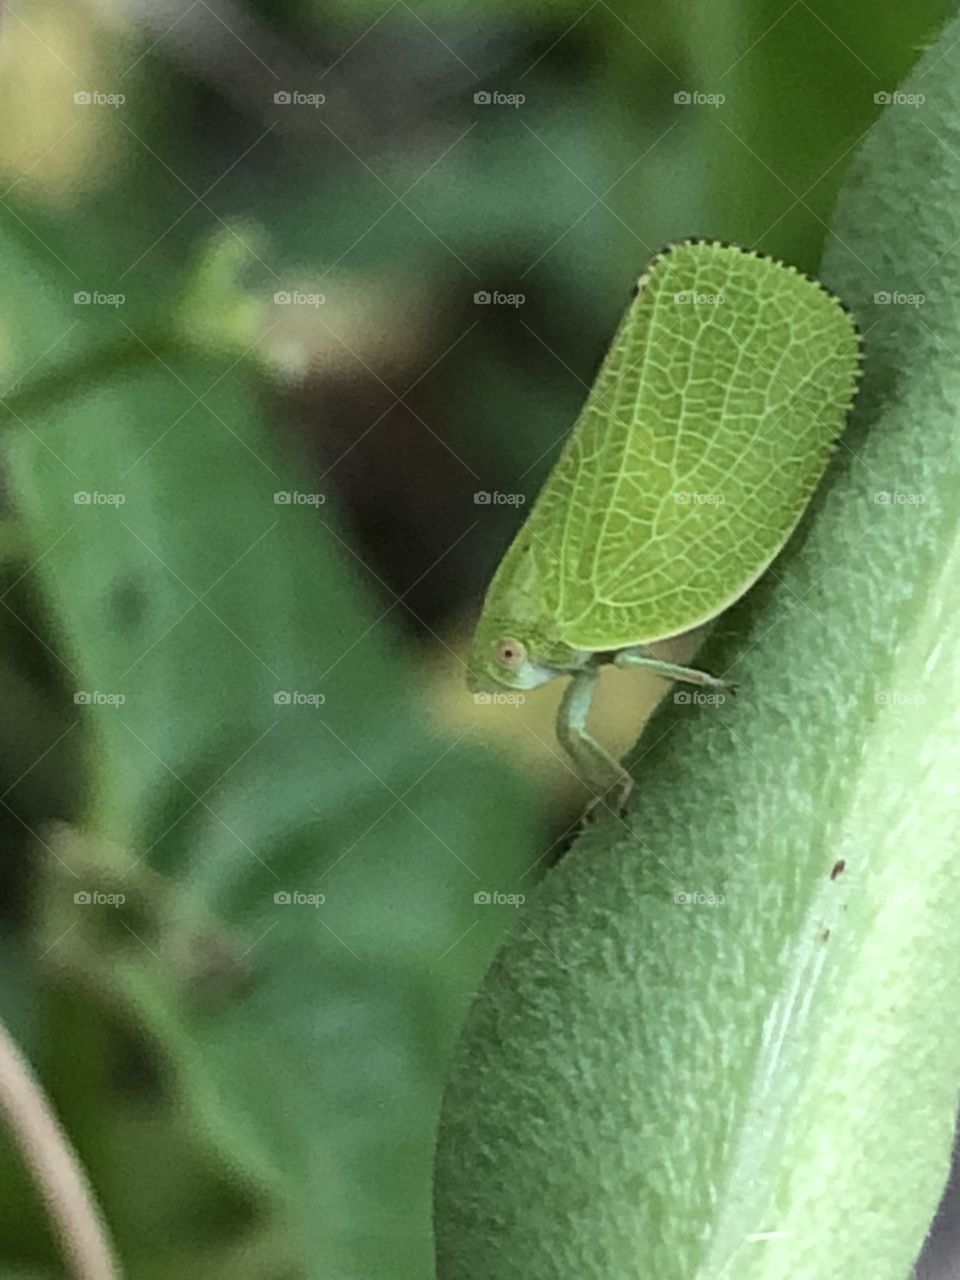 Green Insect on Green Bean